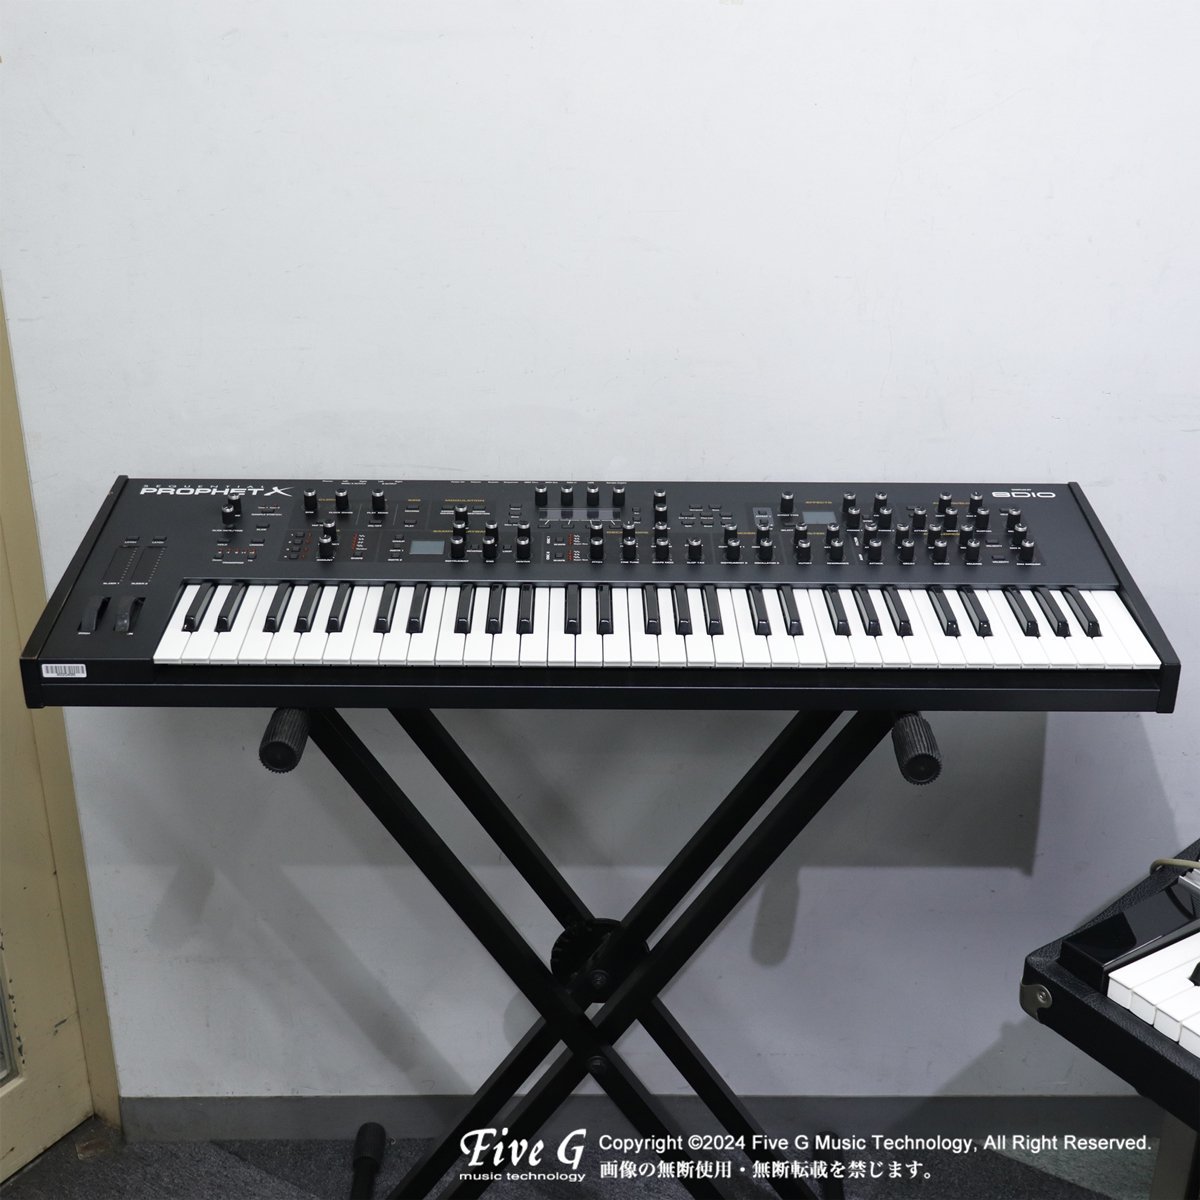 SEQUENTIAL | Prophet X | 中古 - Used - シンセサイザー キーボード | Five G music technology